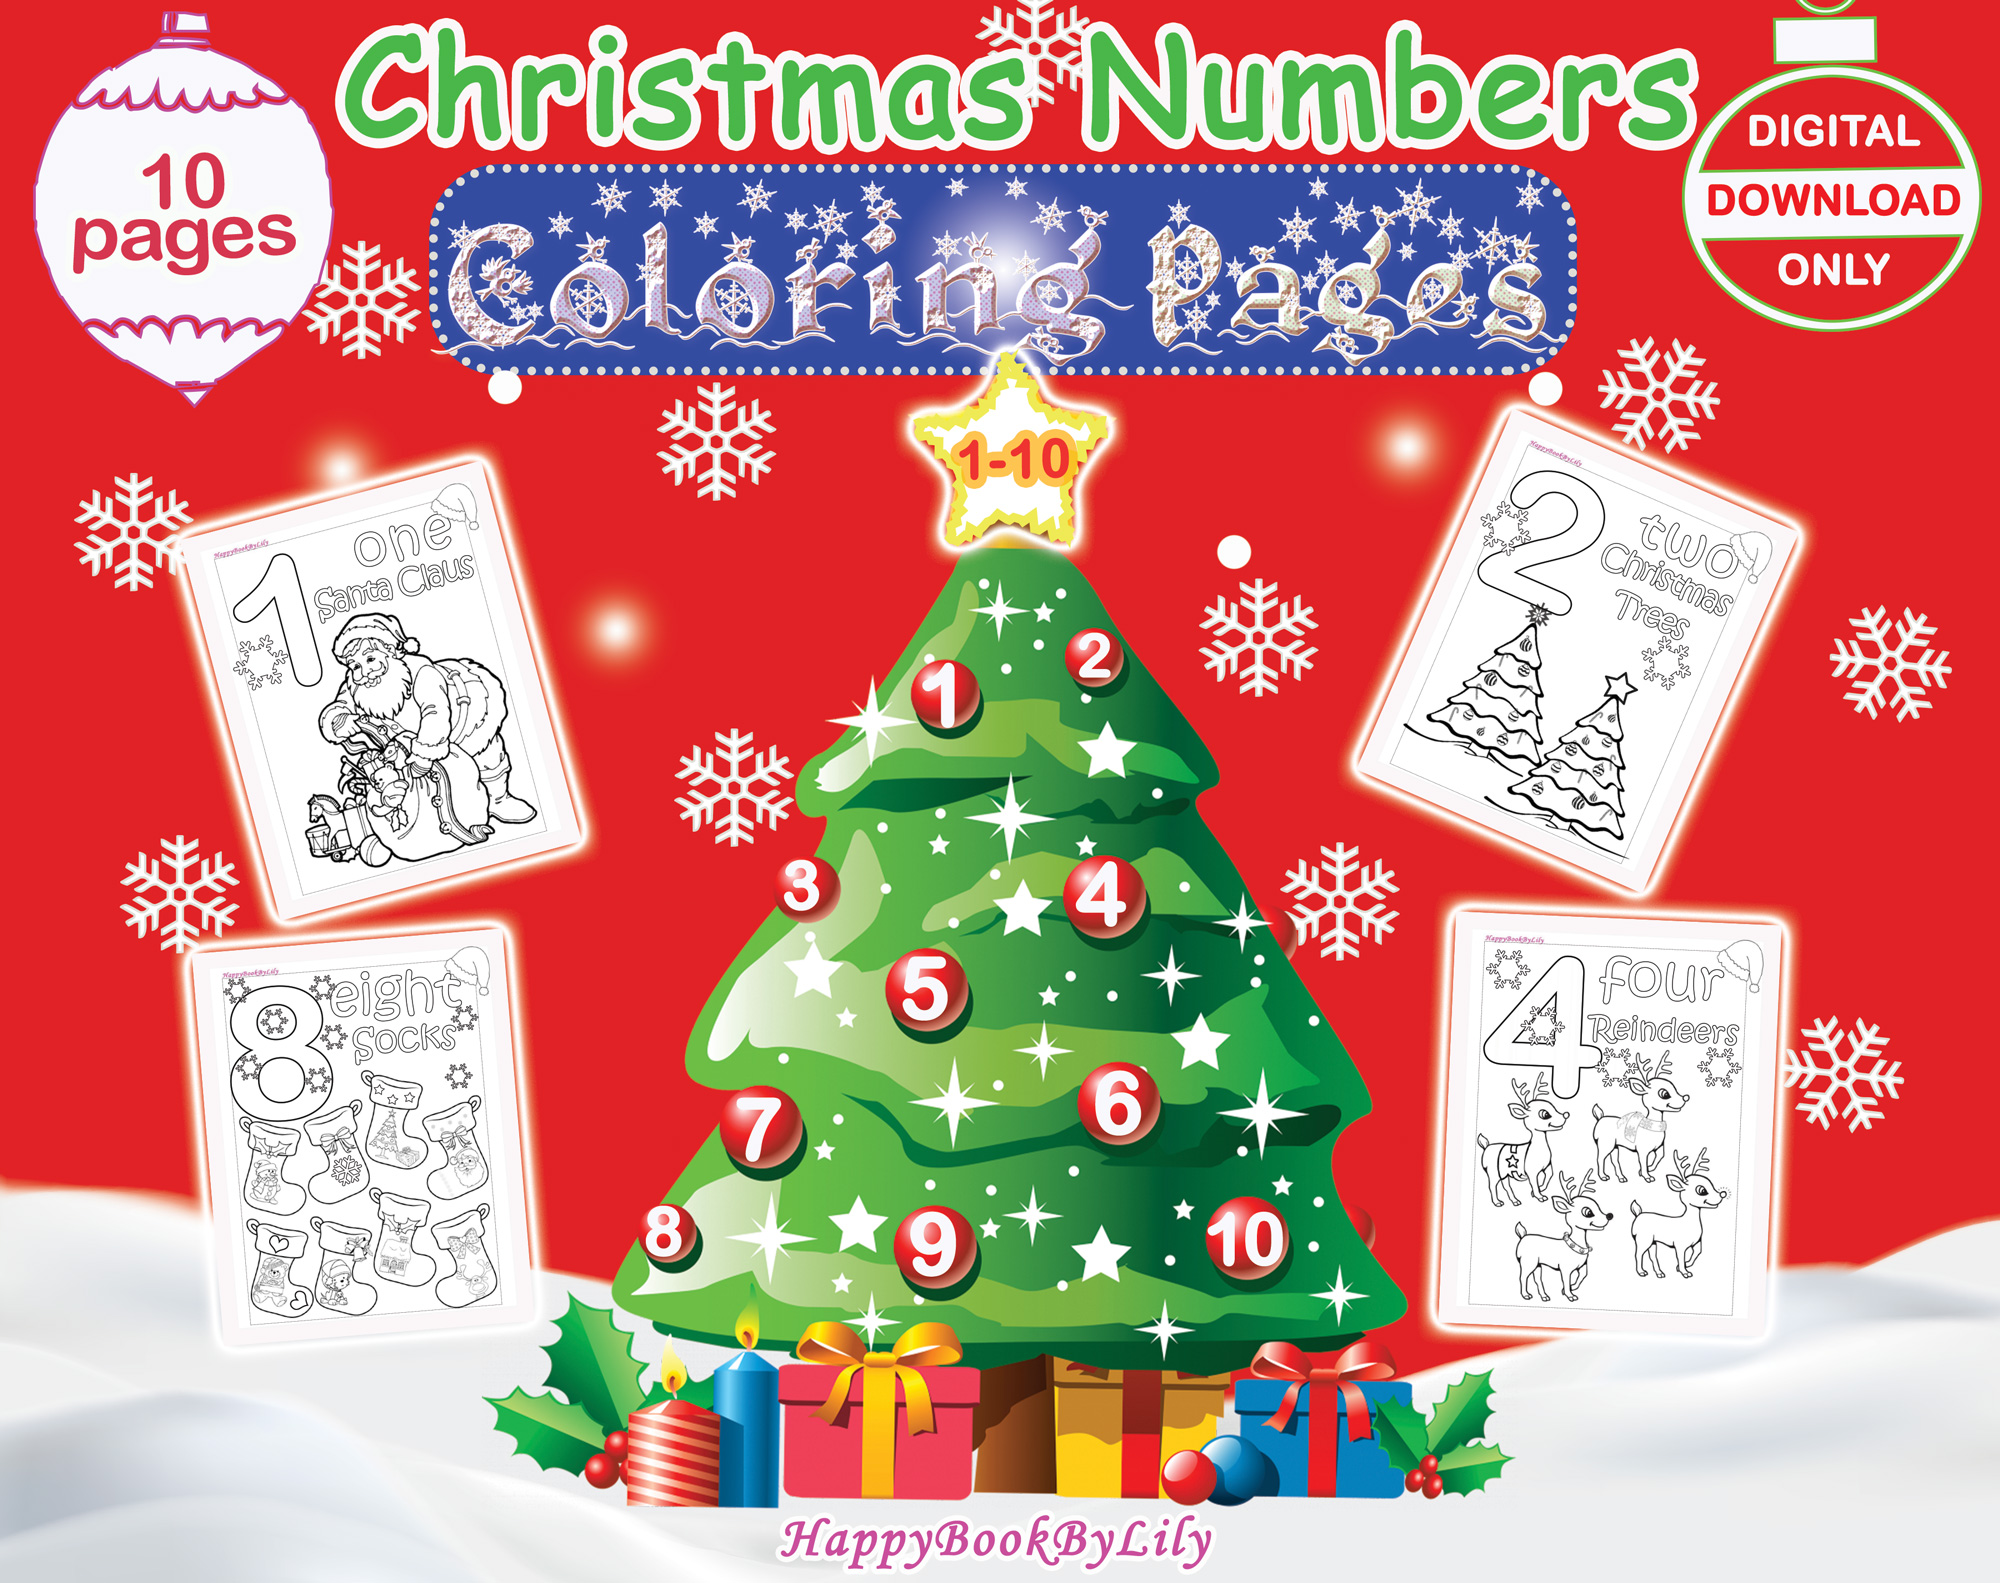 FrontPageChristmasNumbers Etsy